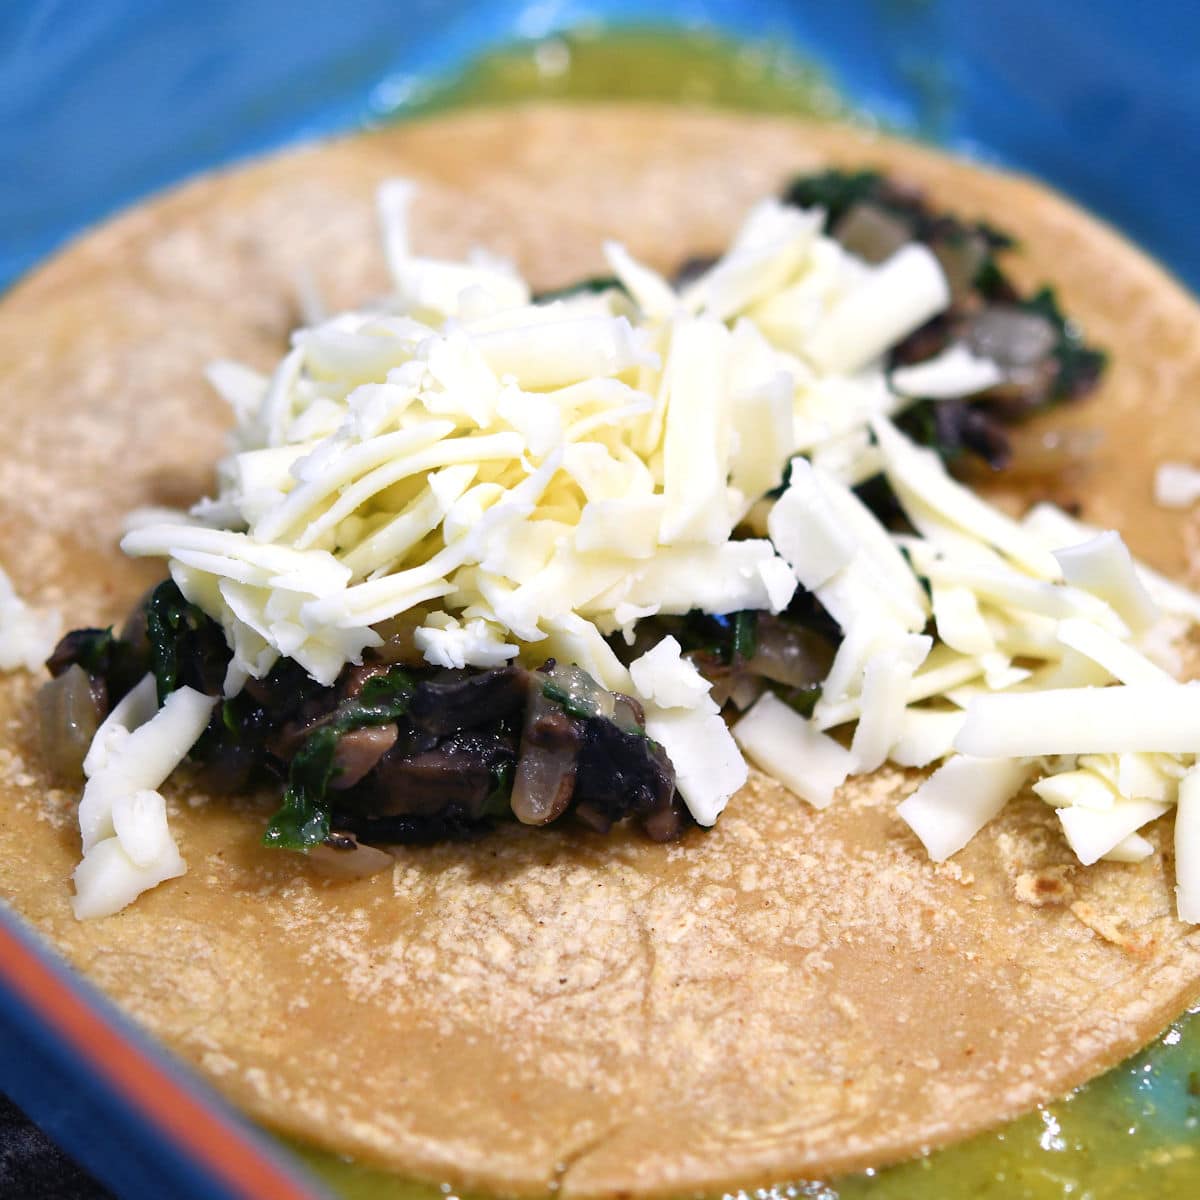 corn tortilla with spinach filling and cheese, ready to roll up